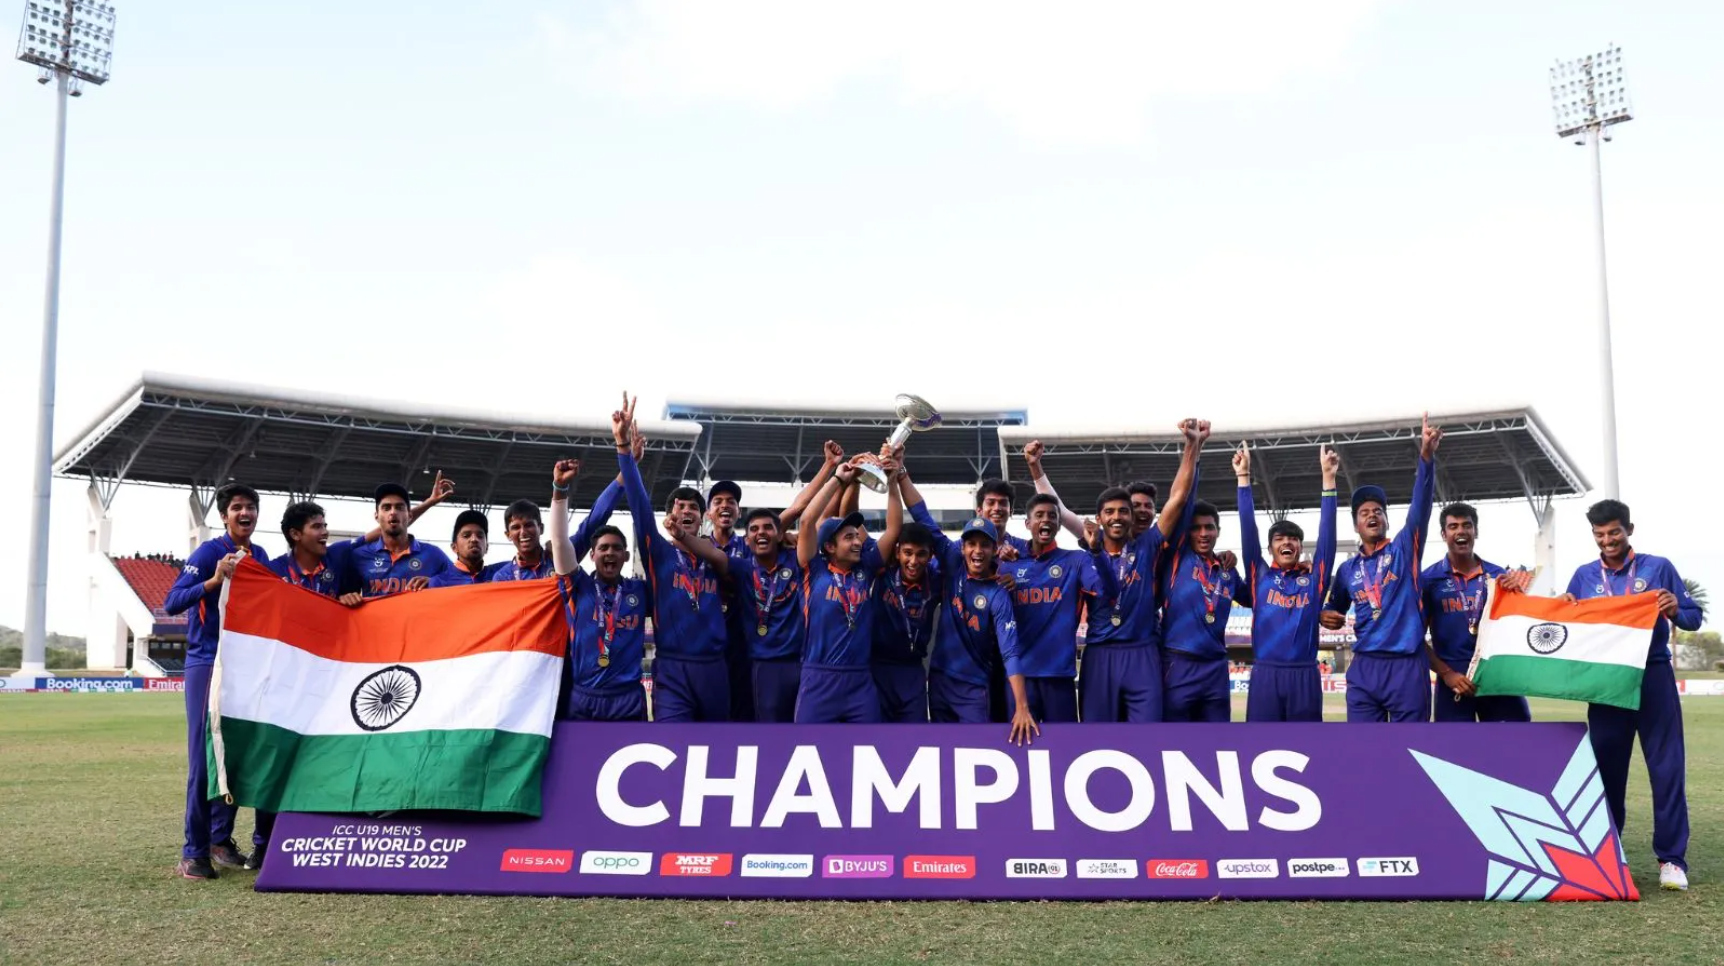 What is the format of the U19 cricket world cup?